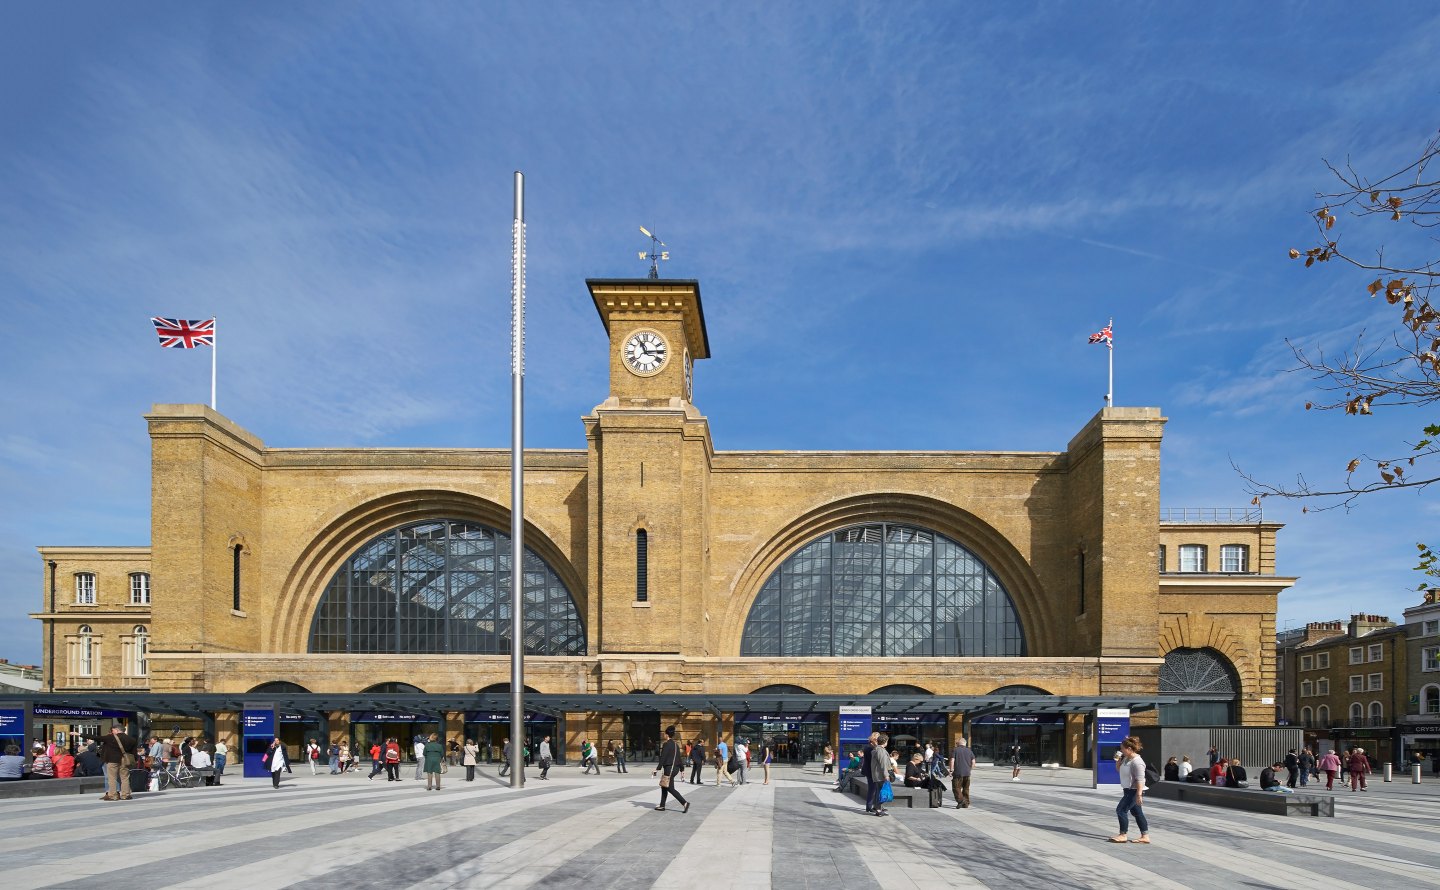 King’s Cross ranked Best Railway Station in the UK